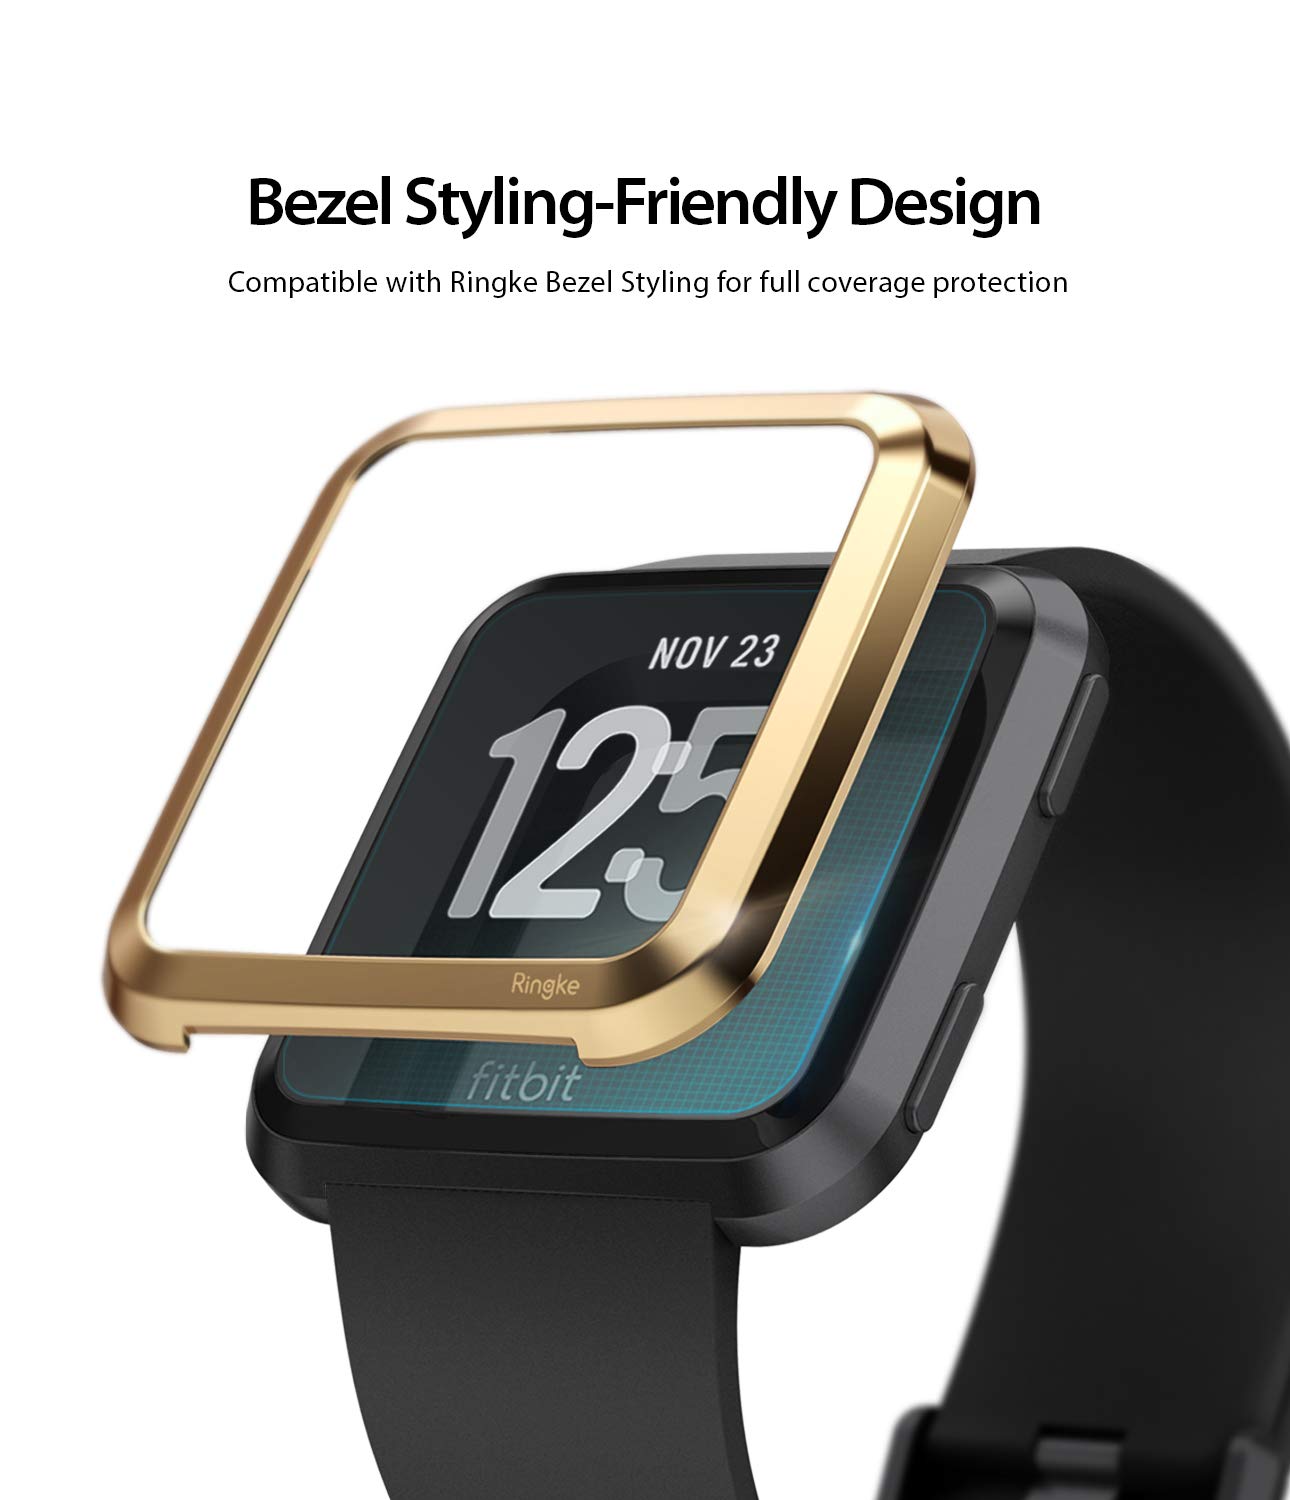 Fitbit Versa Screen Protector Invisible Defender Glass, ringke bezel styling friendly design